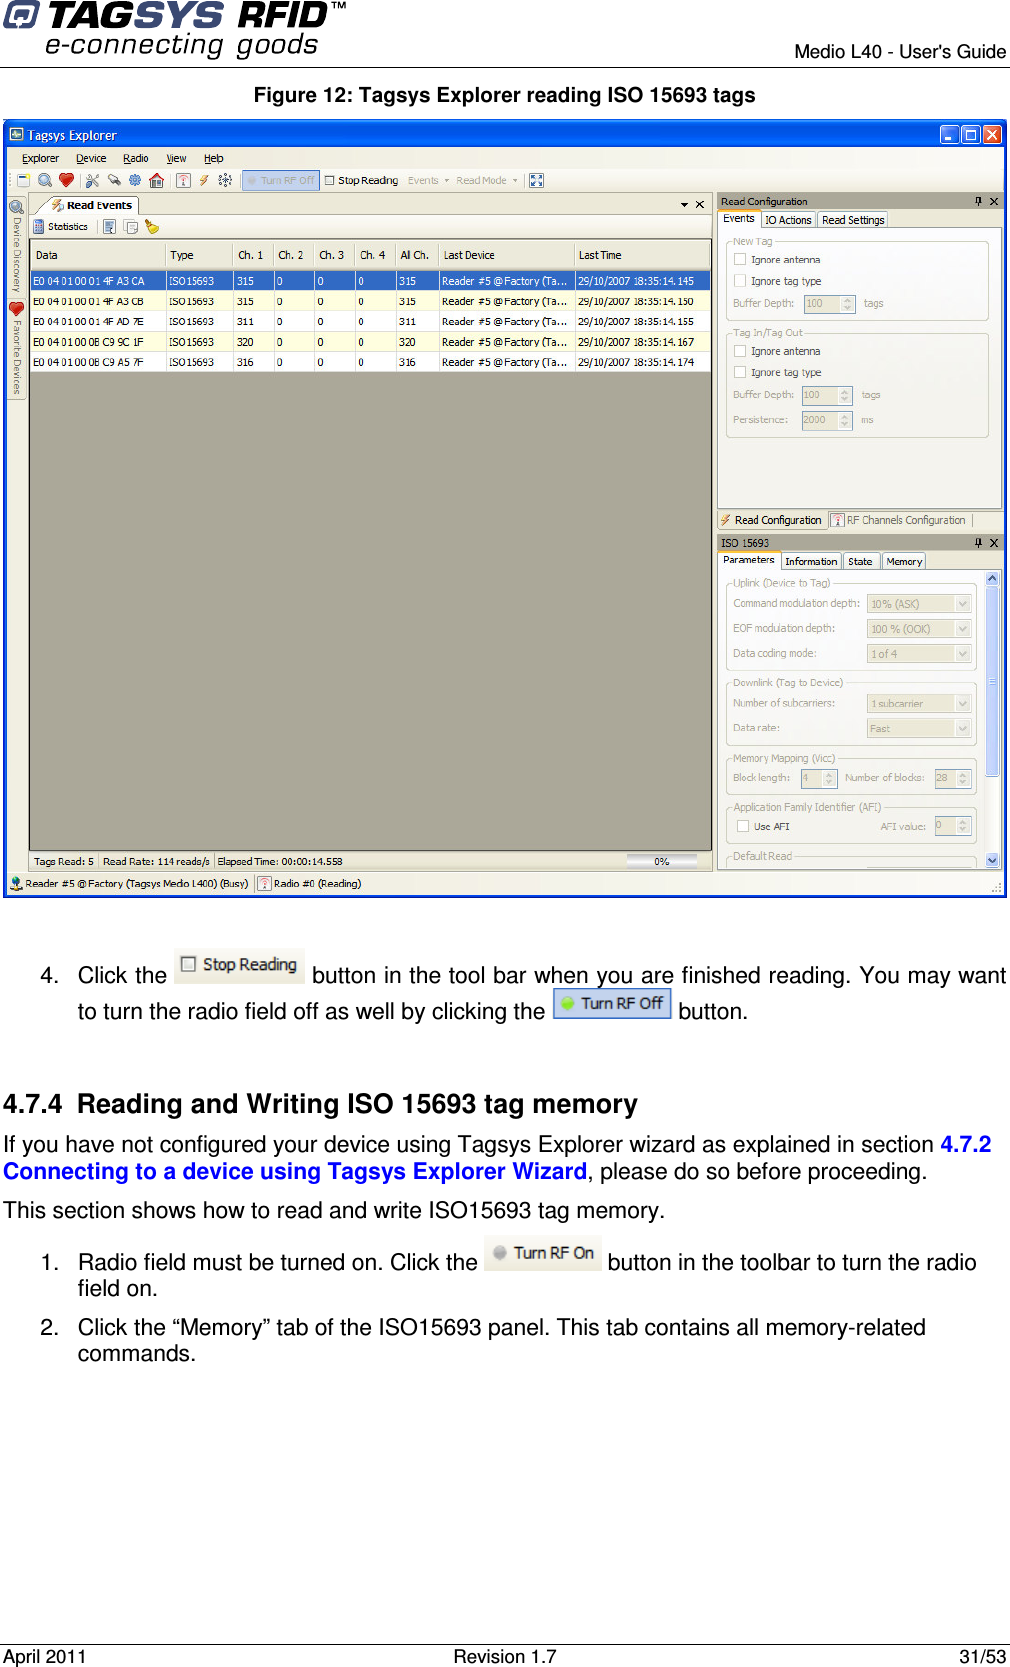        Medio L40 - User&apos;s Guide April 2011  Revision 1.7  31/53  Figure 12: Tagsys Explorer reading ISO 15693 tags   4.  Click the   button in the tool bar when you are finished reading. You may want to turn the radio field off as well by clicking the   button.  4.7.4  Reading and Writing ISO 15693 tag memory If you have not configured your device using Tagsys Explorer wizard as explained in section 4.7.2 Connecting to a device using Tagsys Explorer Wizard, please do so before proceeding. This section shows how to read and write ISO15693 tag memory. 1.  Radio field must be turned on. Click the   button in the toolbar to turn the radio field on. 2.  Click the “Memory” tab of the ISO15693 panel. This tab contains all memory-related commands. 